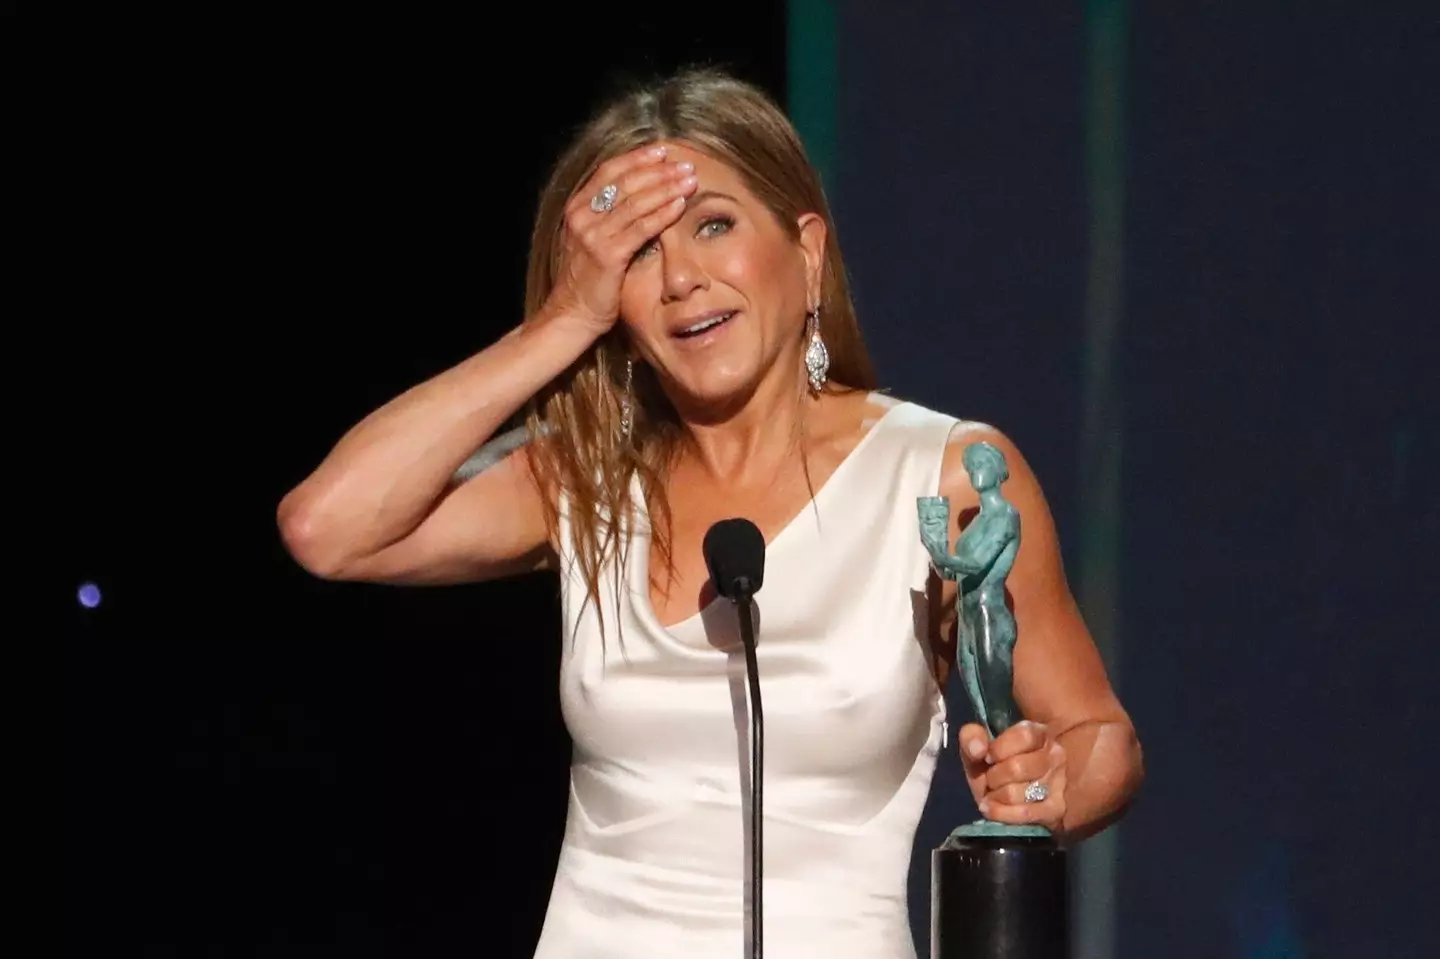 Jennifer Aniston is facing backlash for reflections she's made about Hollywood.